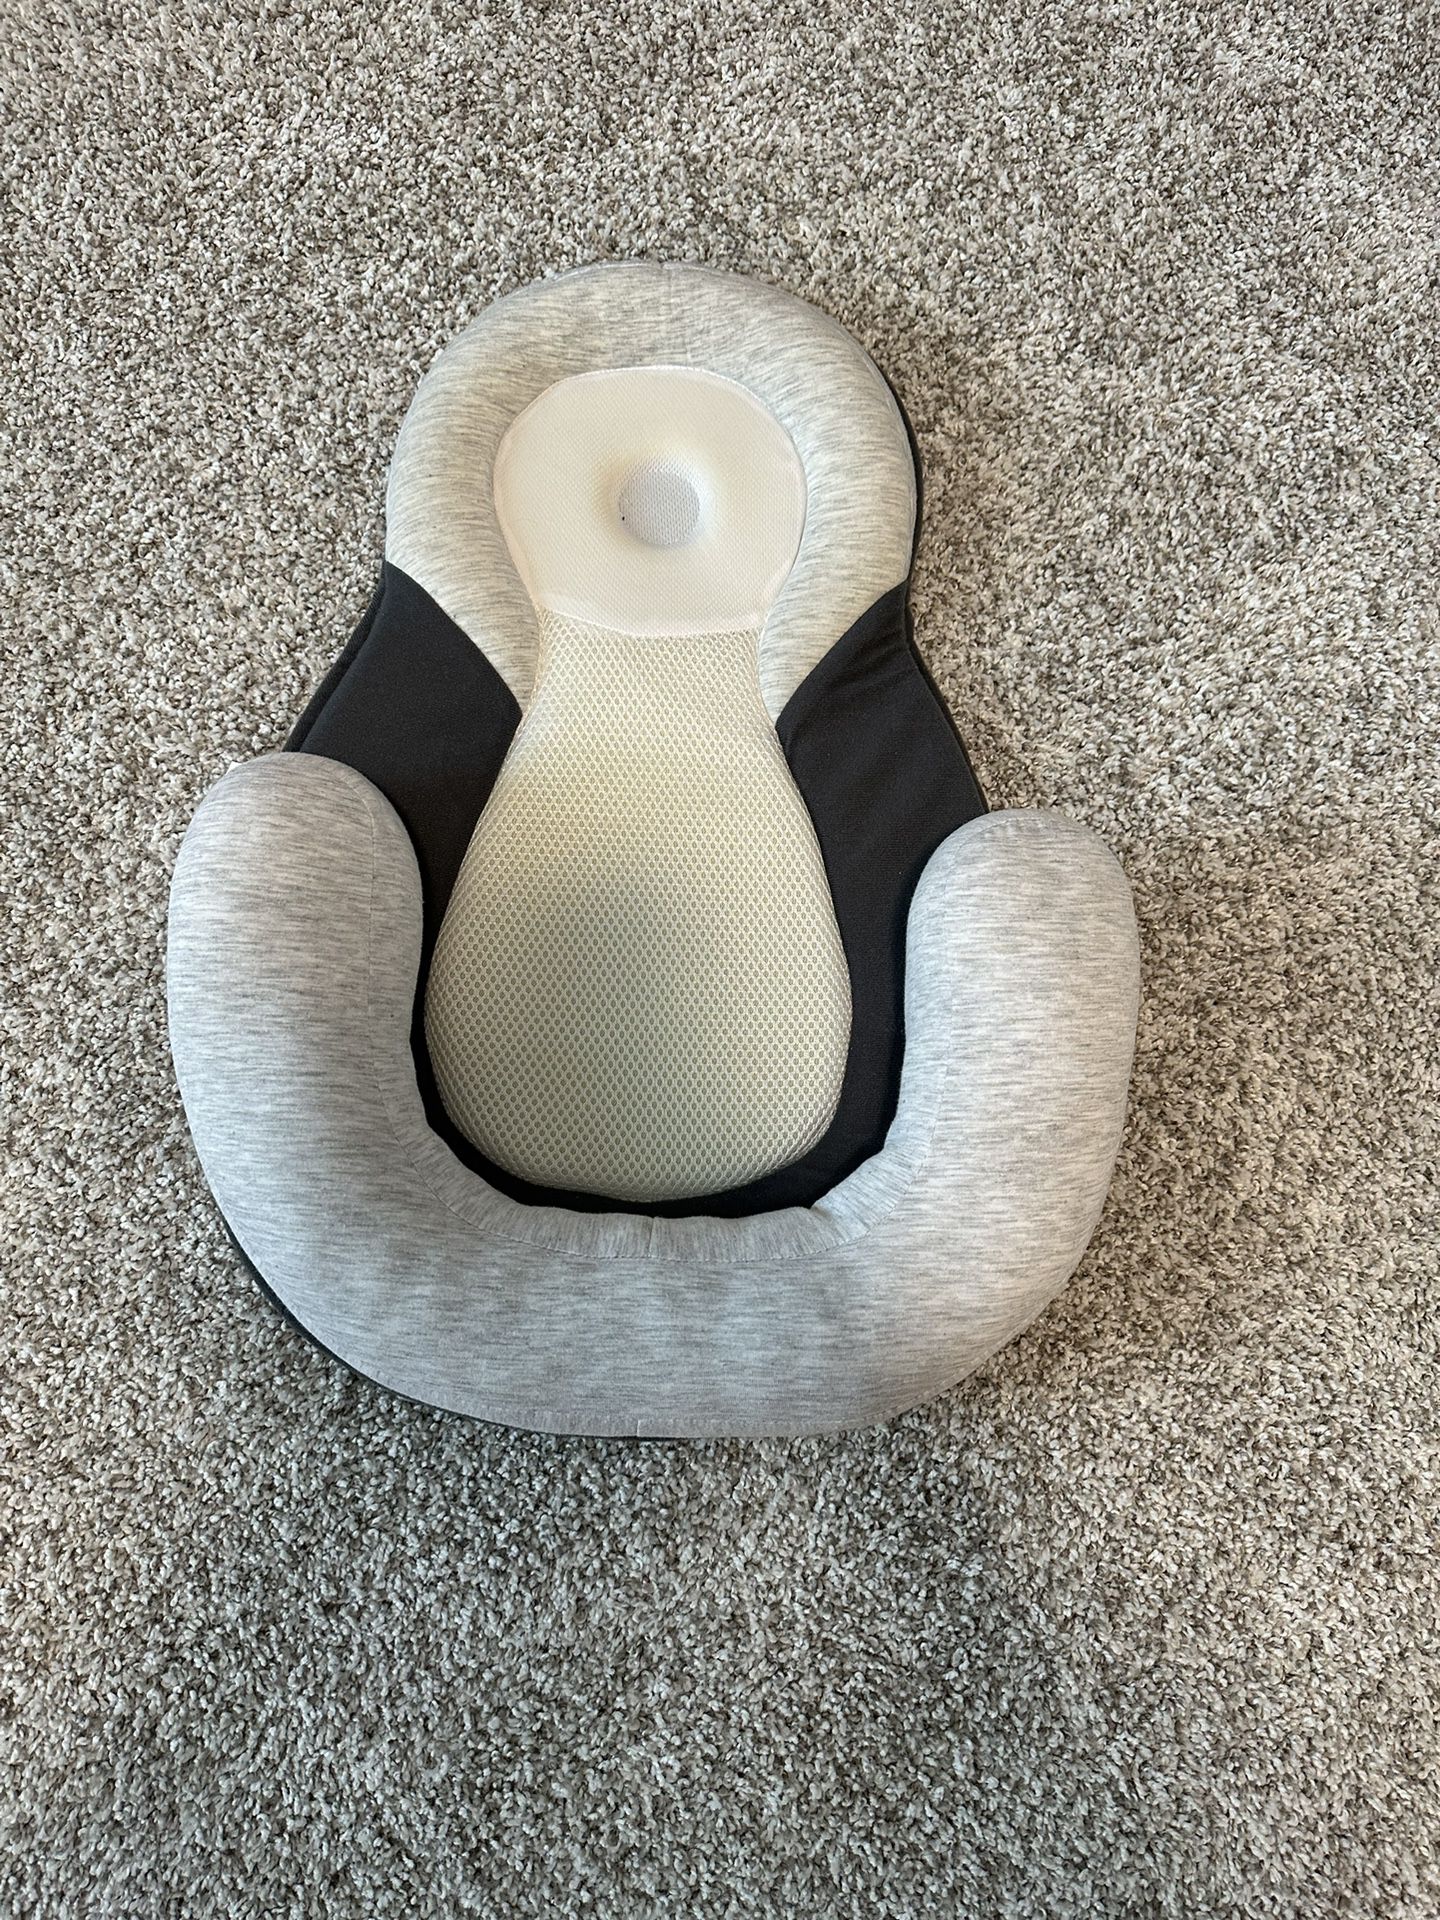 Infant Hewmaw bed pillow portable snuggle nest 